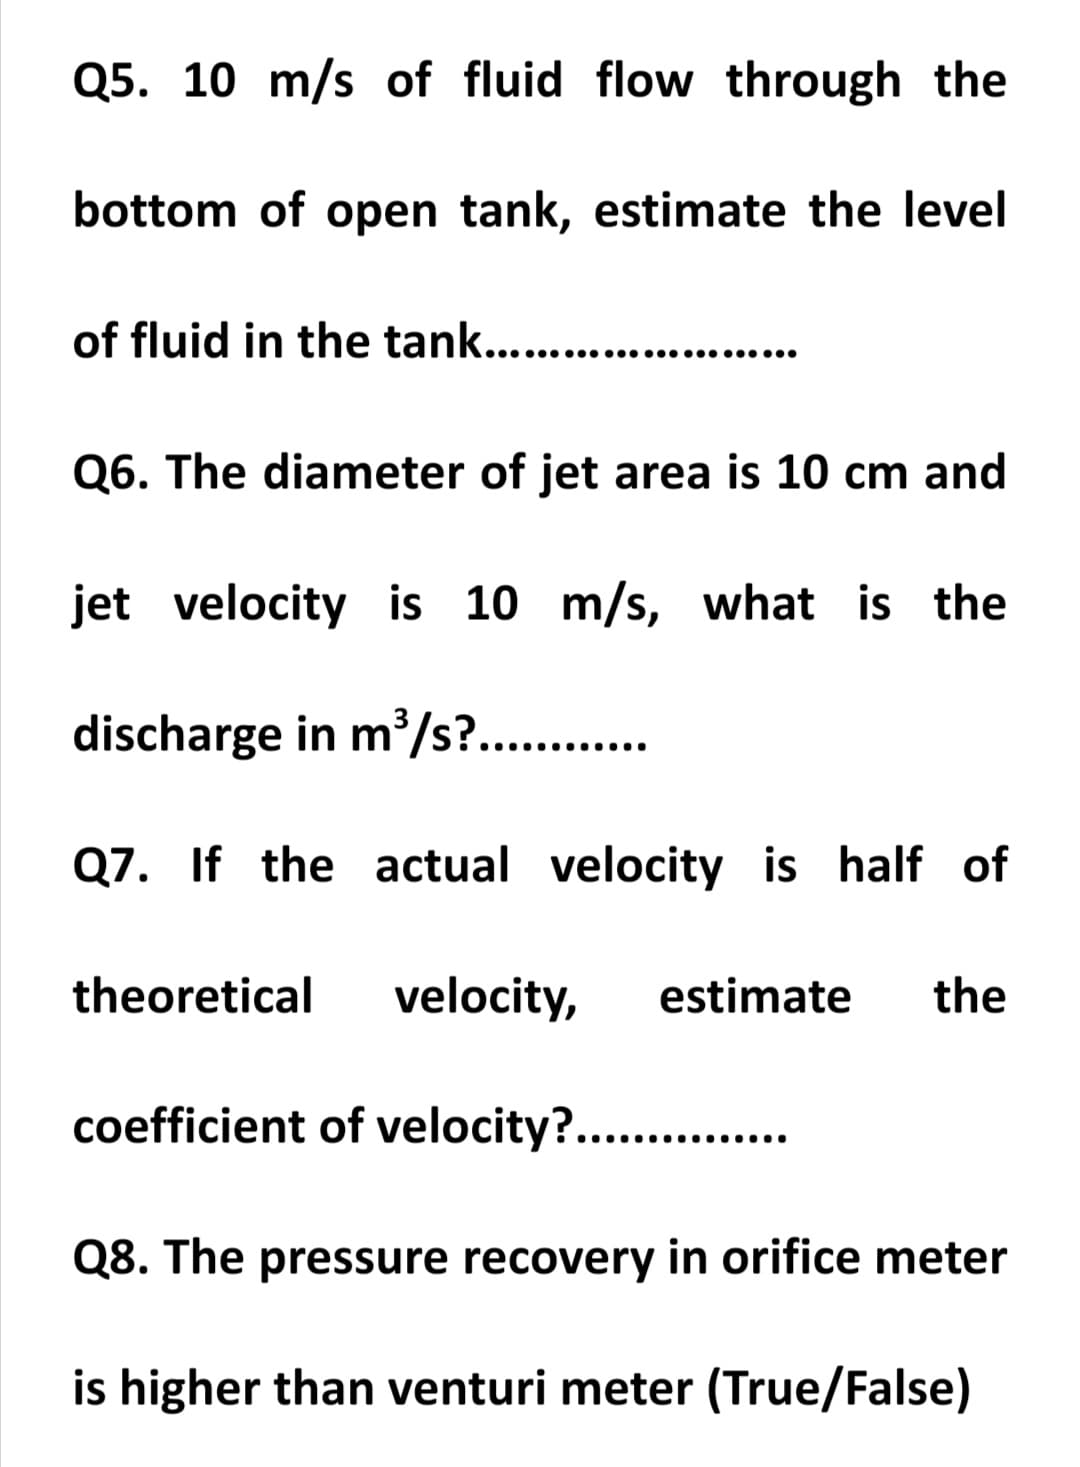 Q5. 10 m/s of fluid flow through the
bottom of open tank, estimate the level
the tank........................
Q6. The diameter of jet area is 10 cm and
jet velocity is 10 m/s, what is the
discharge in m/s?.. .
..... .......
Q7. If the actual velocity is half of
theoretical
velocity,
estimate
the
coefficient of velocity?.. .
....
Q8. The pressure recovery in orifice meter
is higher than venturi meter (True/False)
